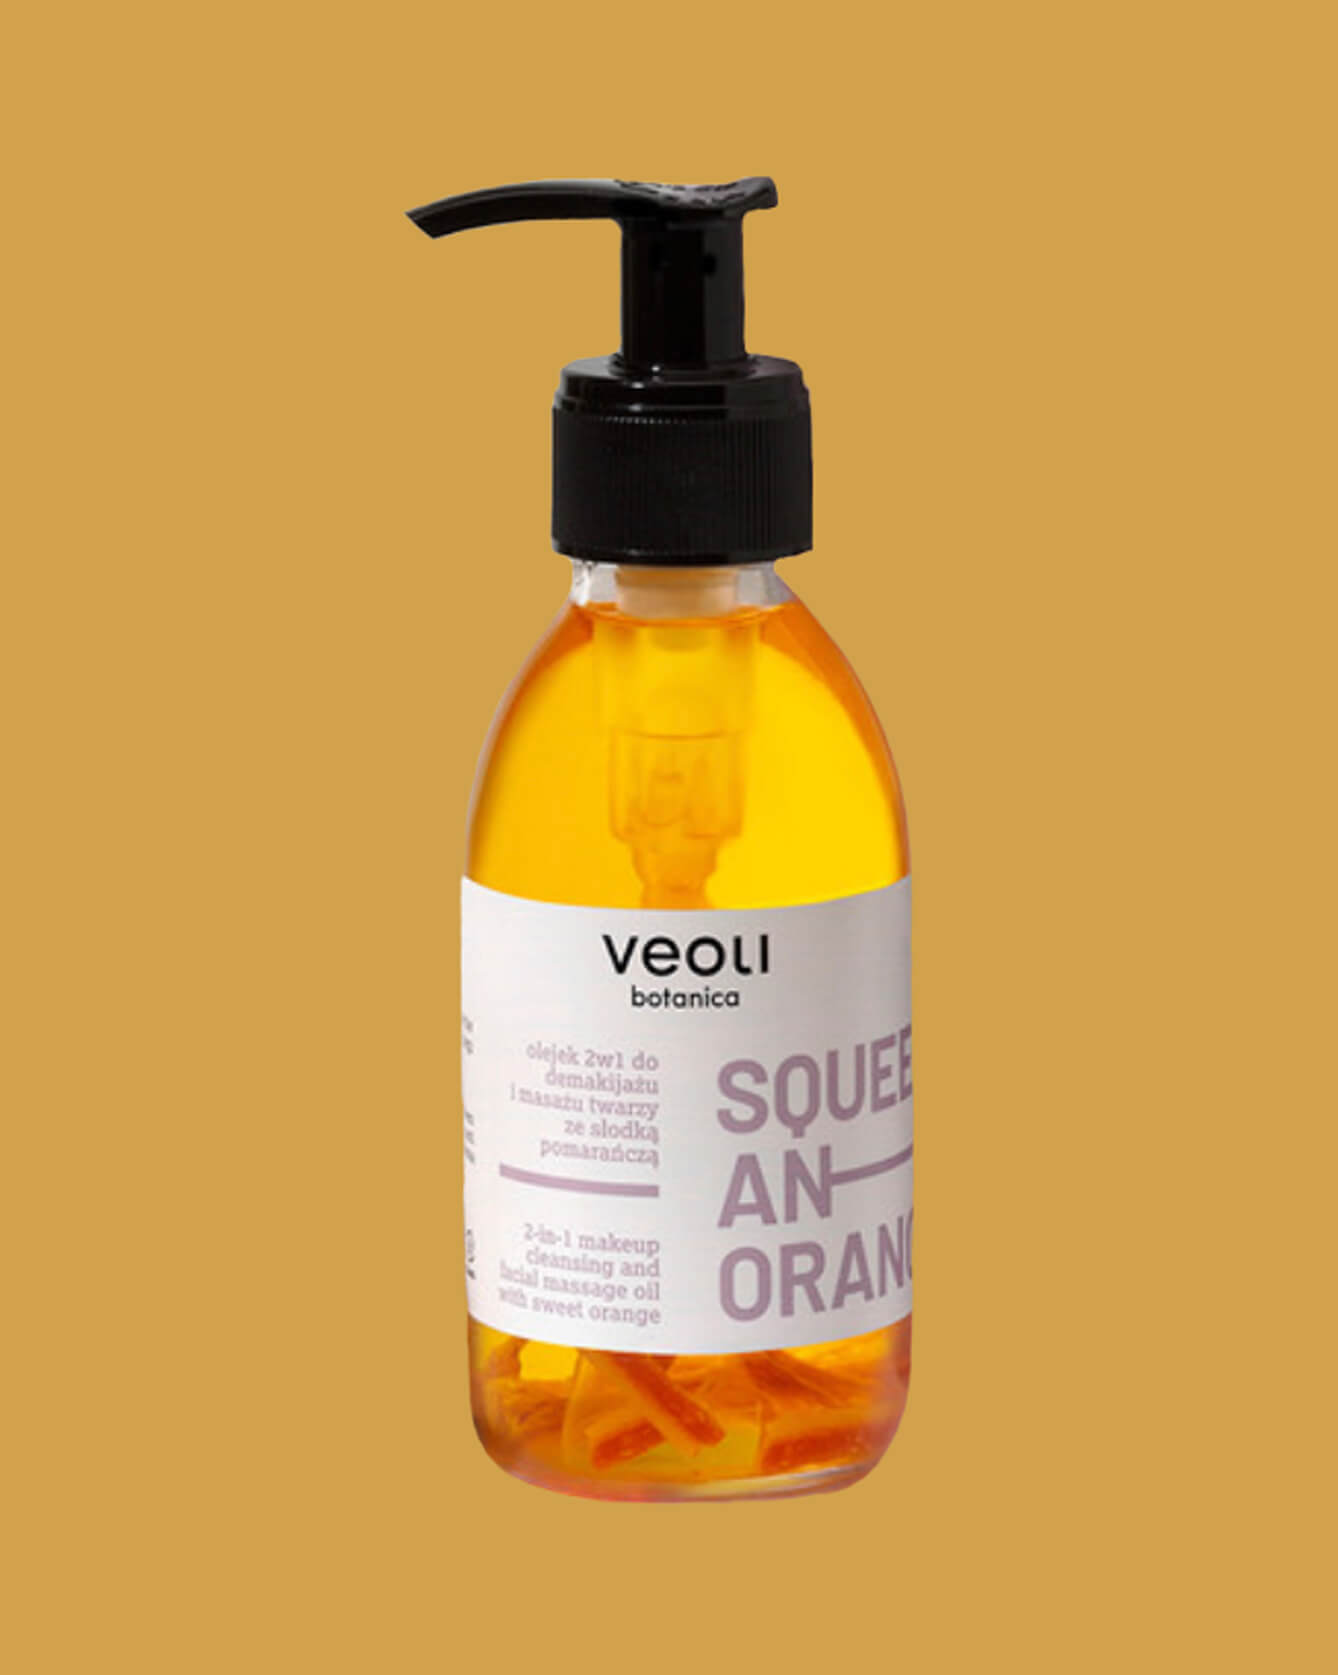 Product photo of Veoli Botanica 2-in-1 cleansing oil.